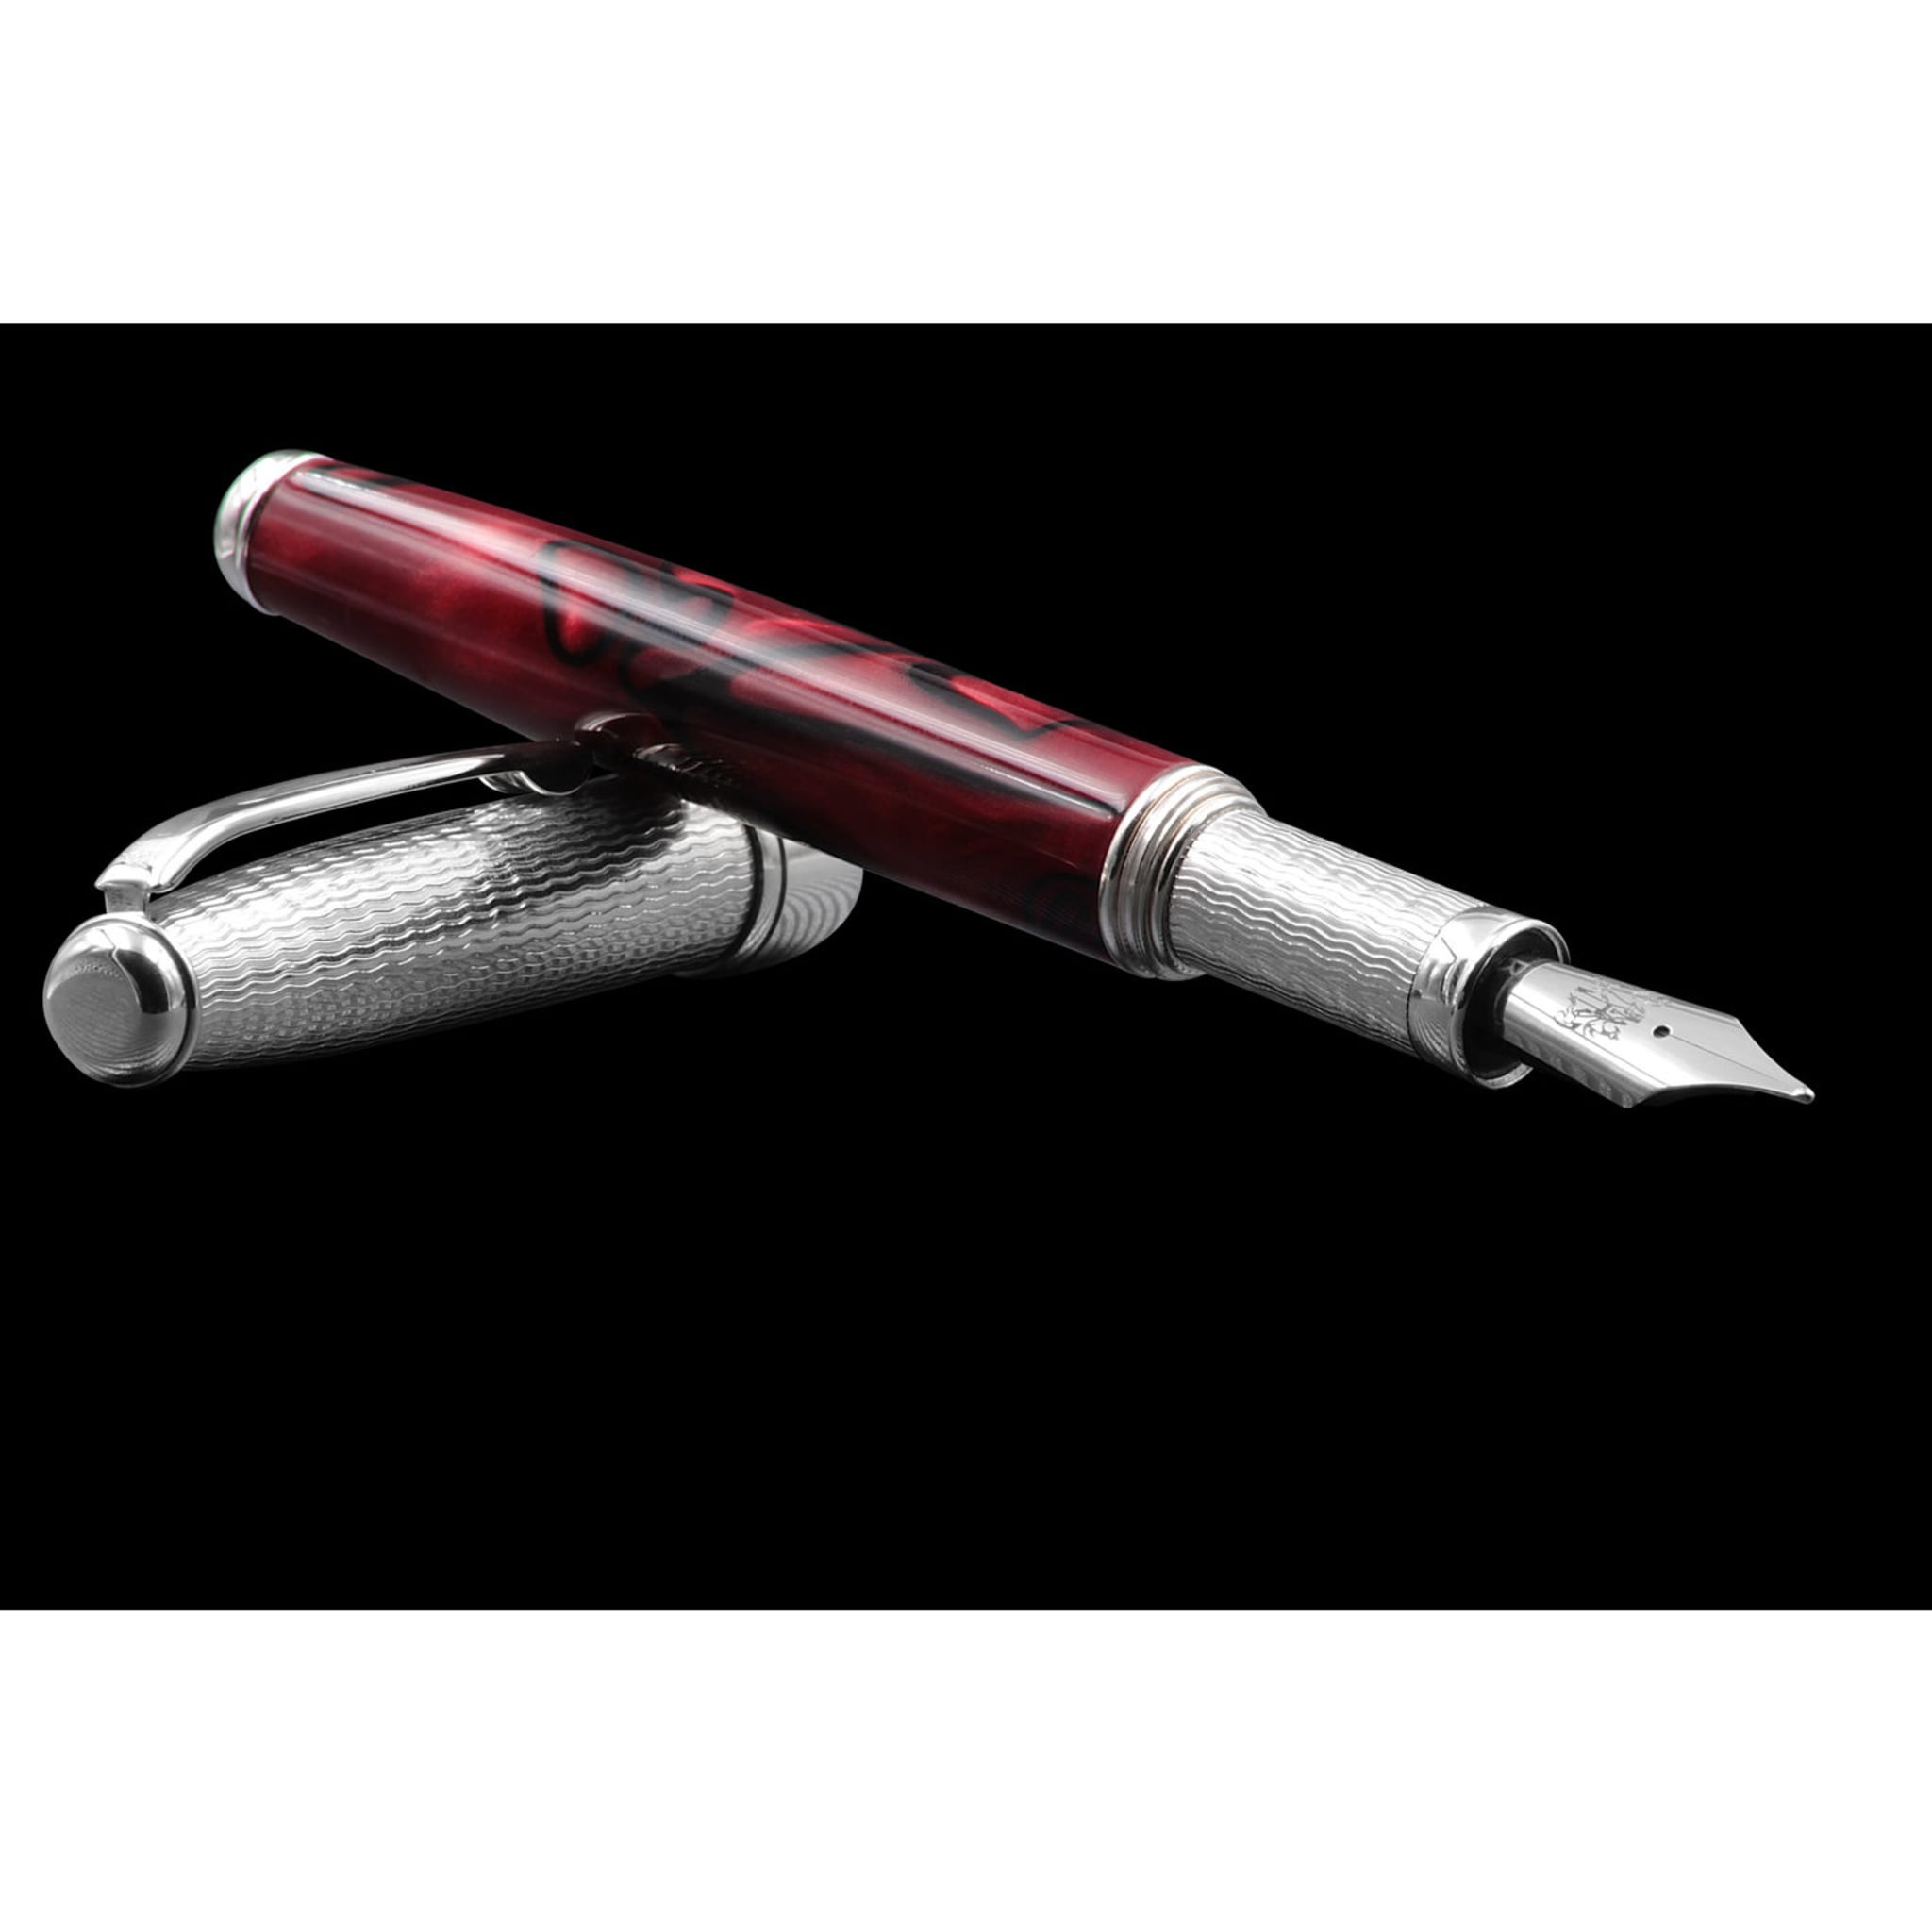 Silver and Burgundy Resin Fountain Pen - Alternative view 4